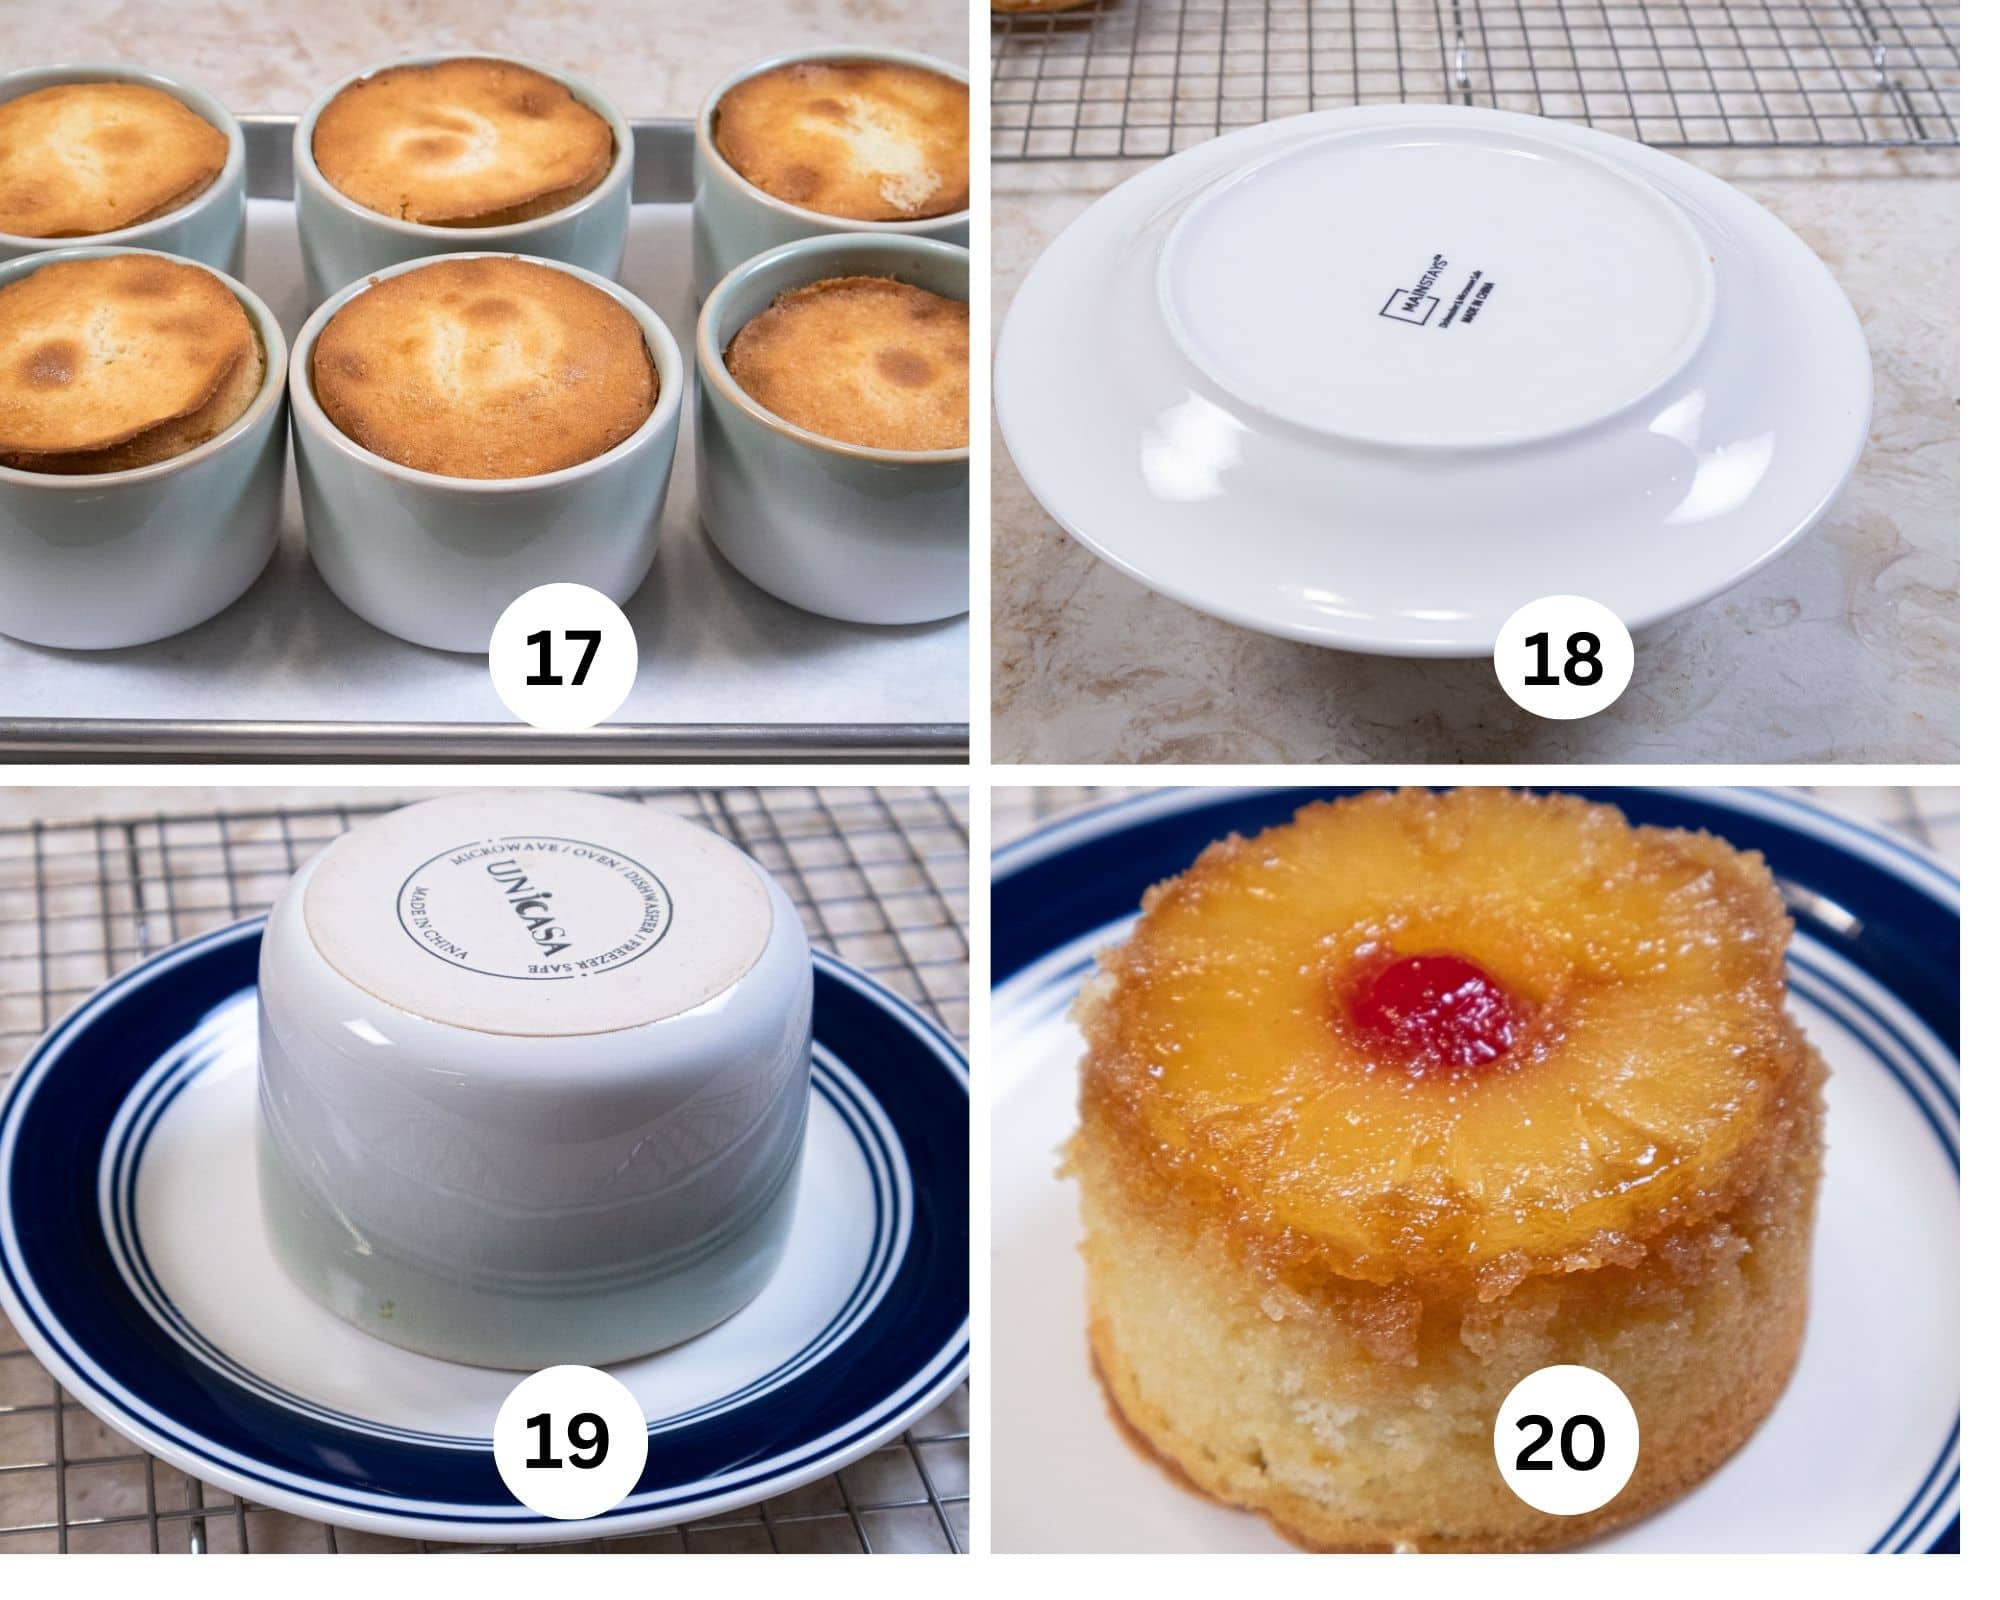 The last collage includes the baked cakes, a plate placed over the top of a ramekin, the ramekin turned over and the cake on a plate. 